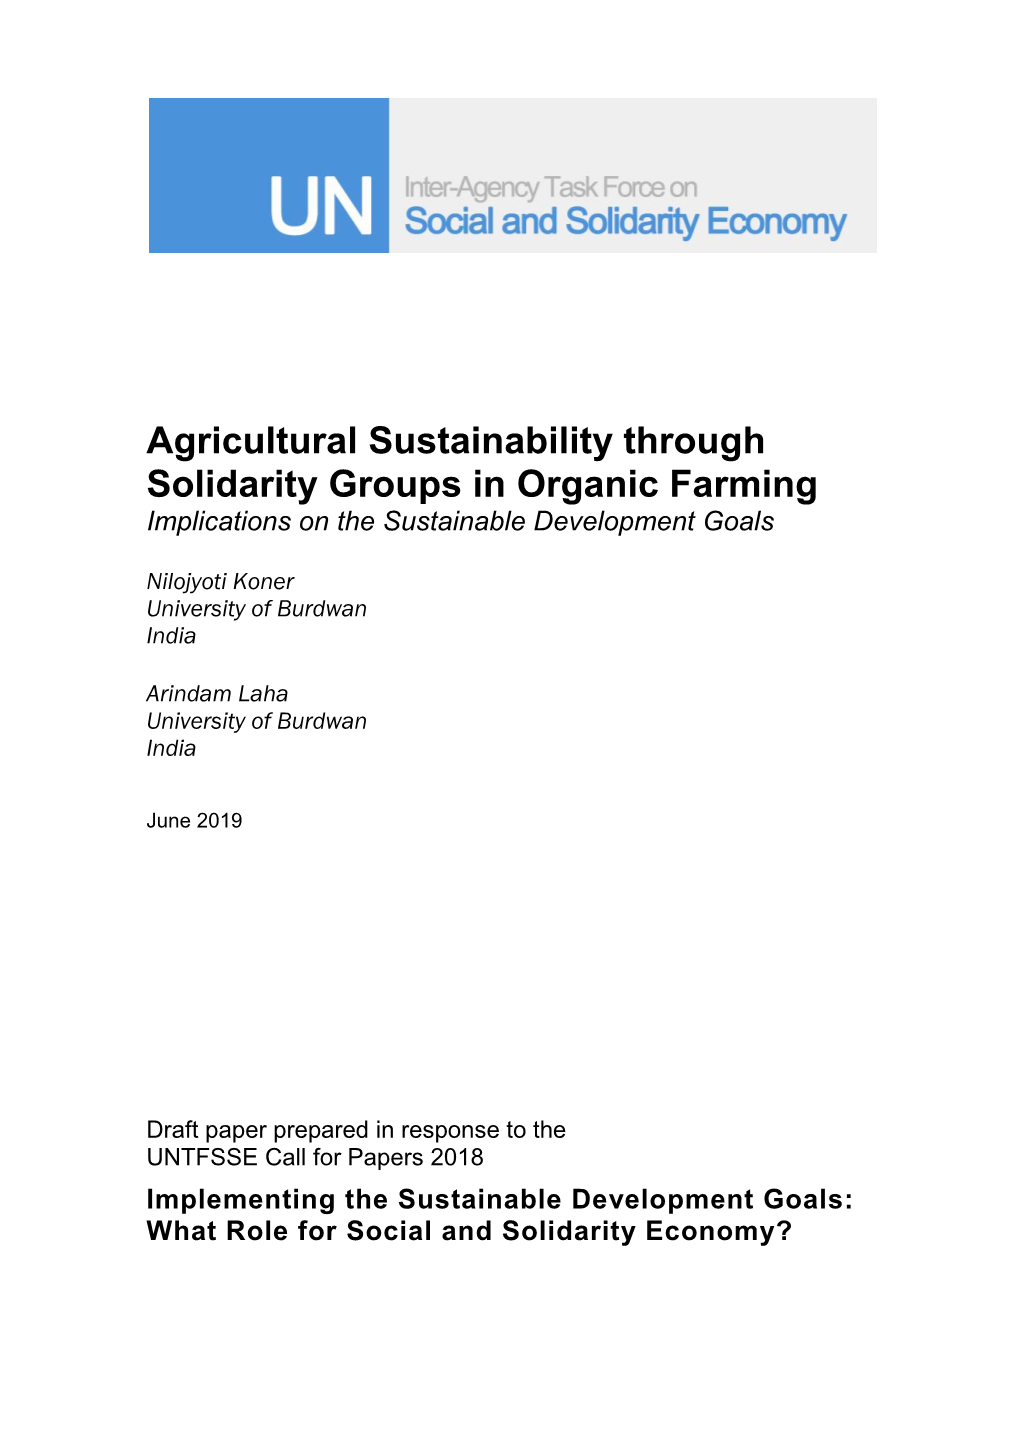 Agricultural Sustainability Through Solidarity Groups in Organic Farming Implications on the Sustainable Development Goals